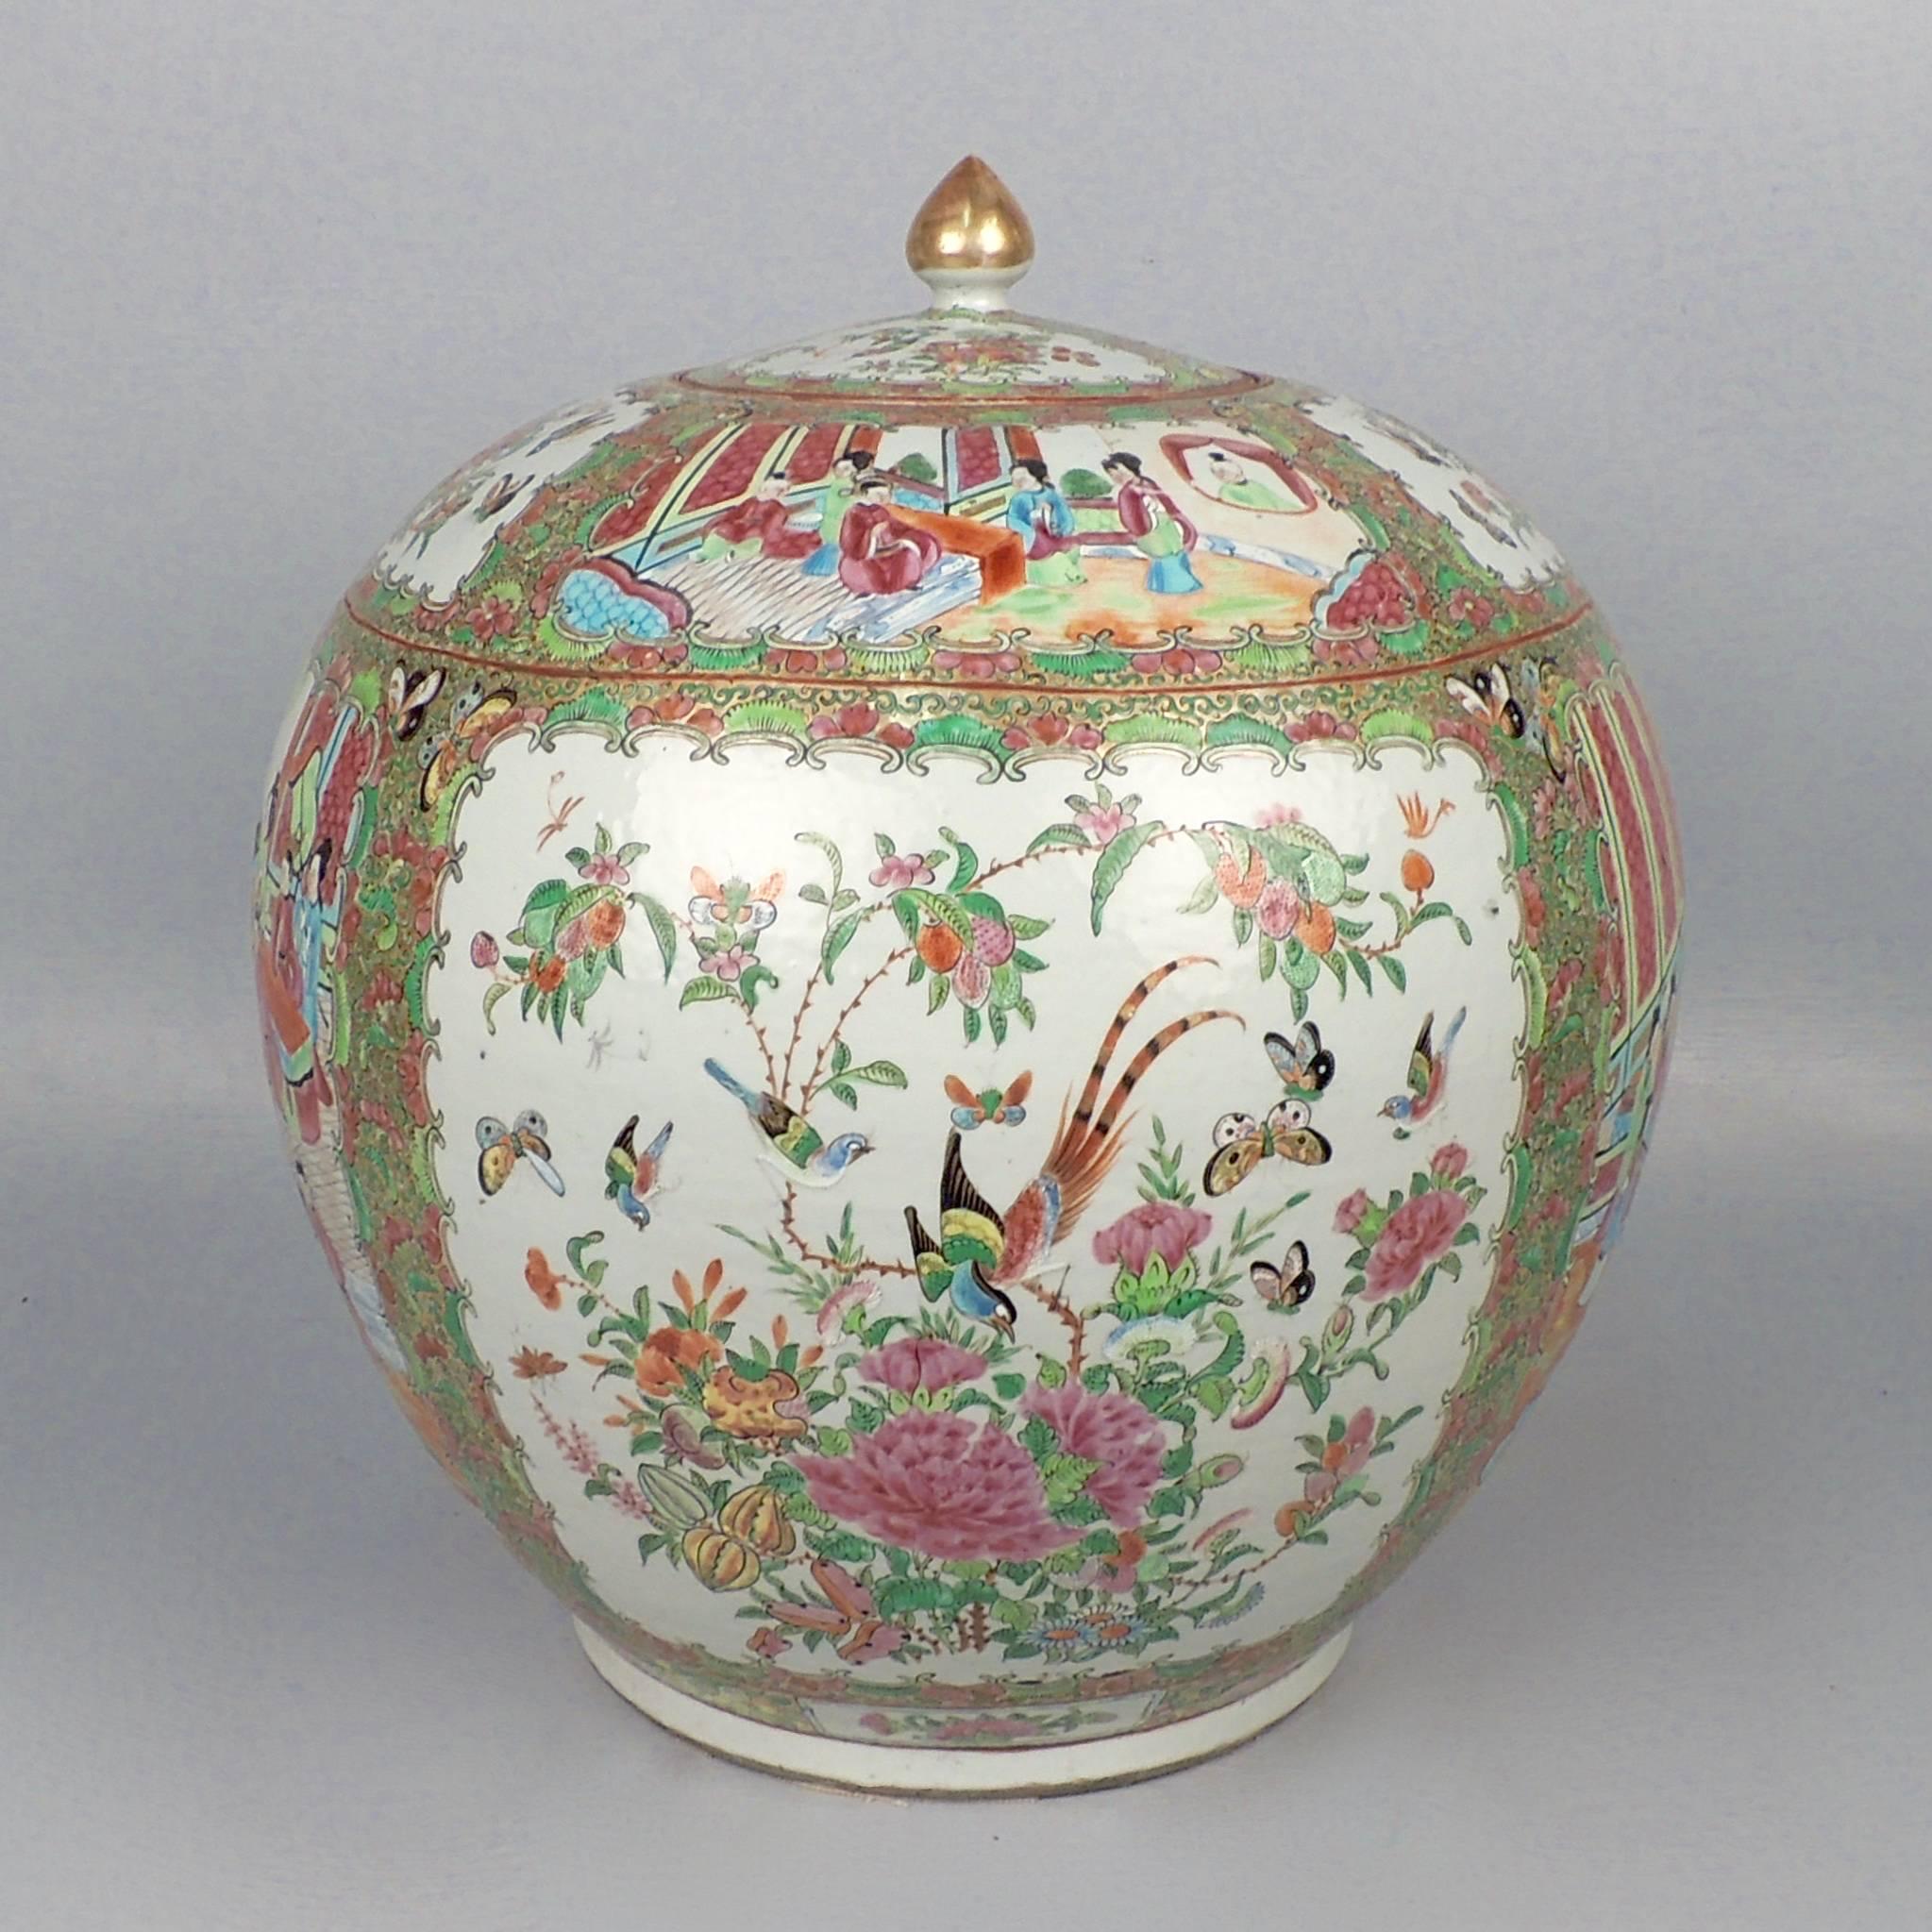 An impressively large, antique Chinese Porcelain lidded round urn or melon jar in the Rose Medallion pattern. The body has the typical alternating interior and bird, insect and peony panels in the typical 